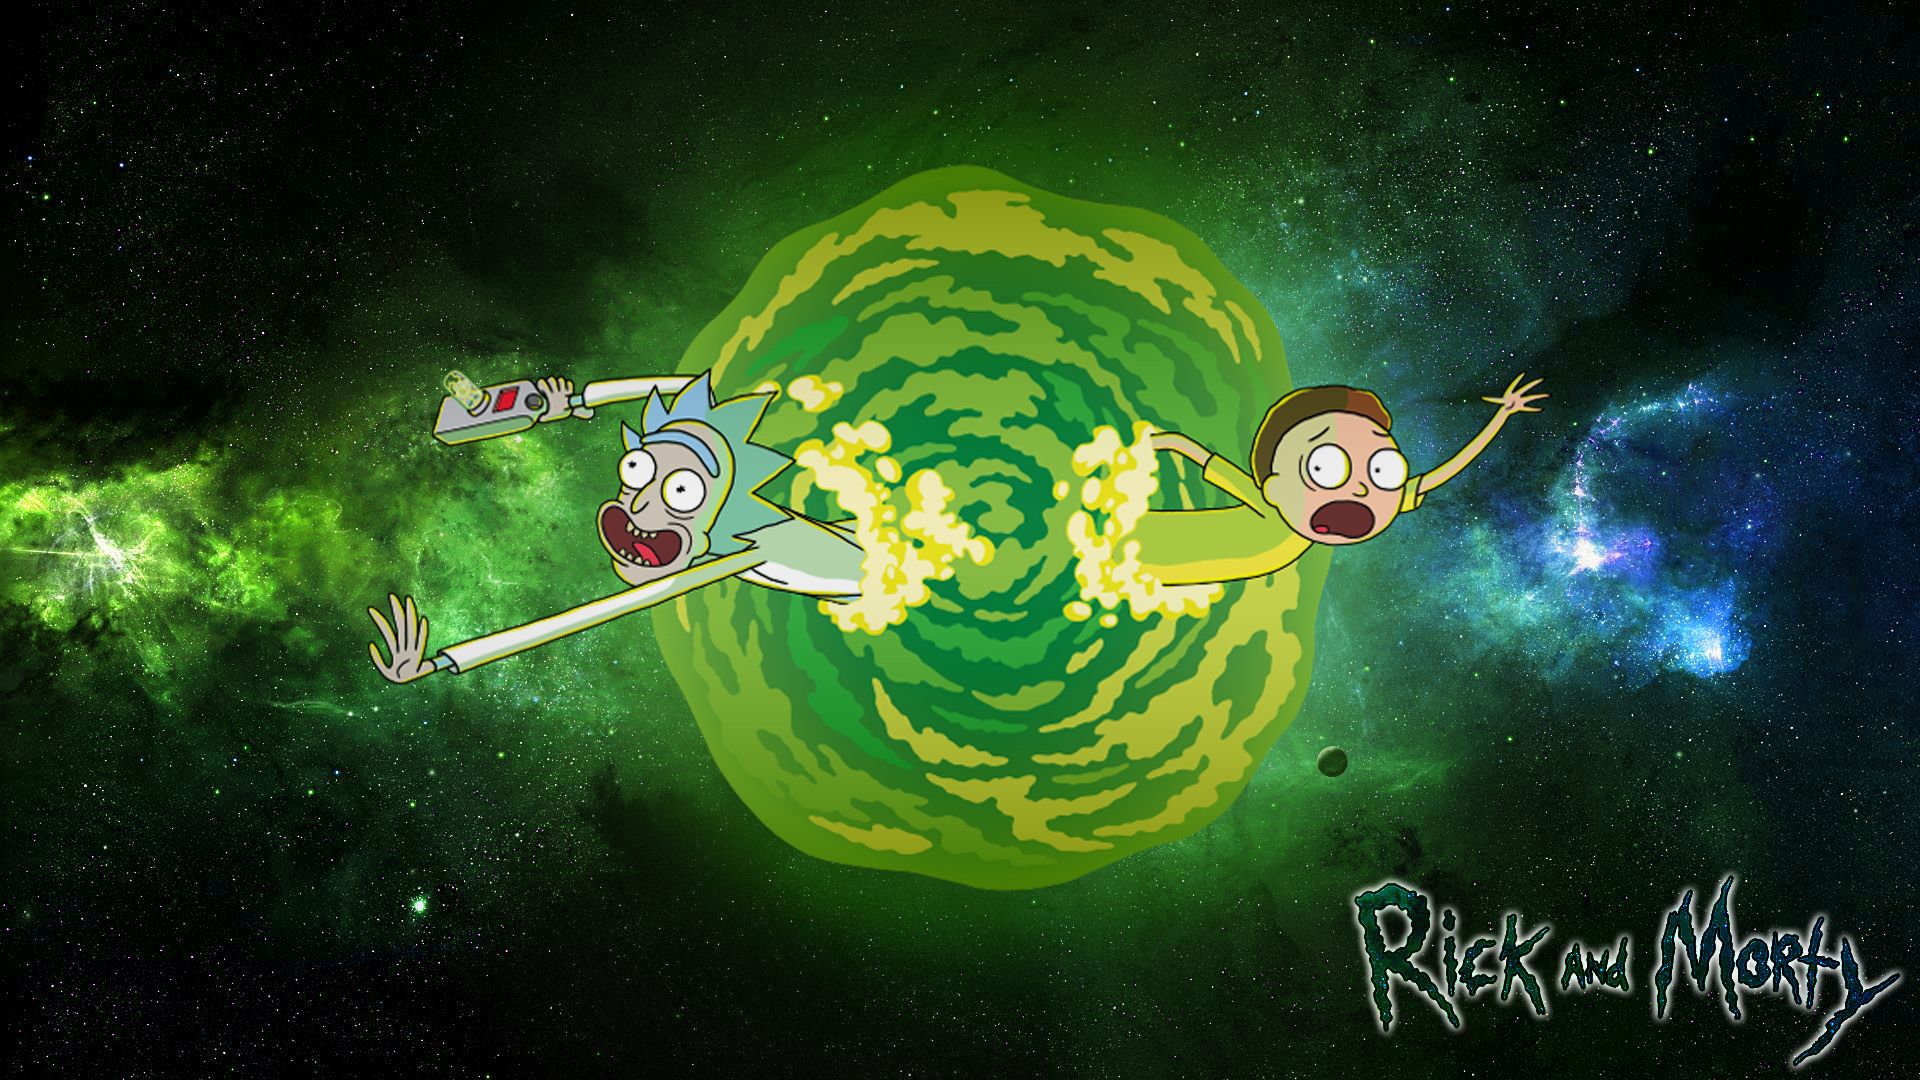 Rick & Morty HD Wallpaper. Background Imagex1080